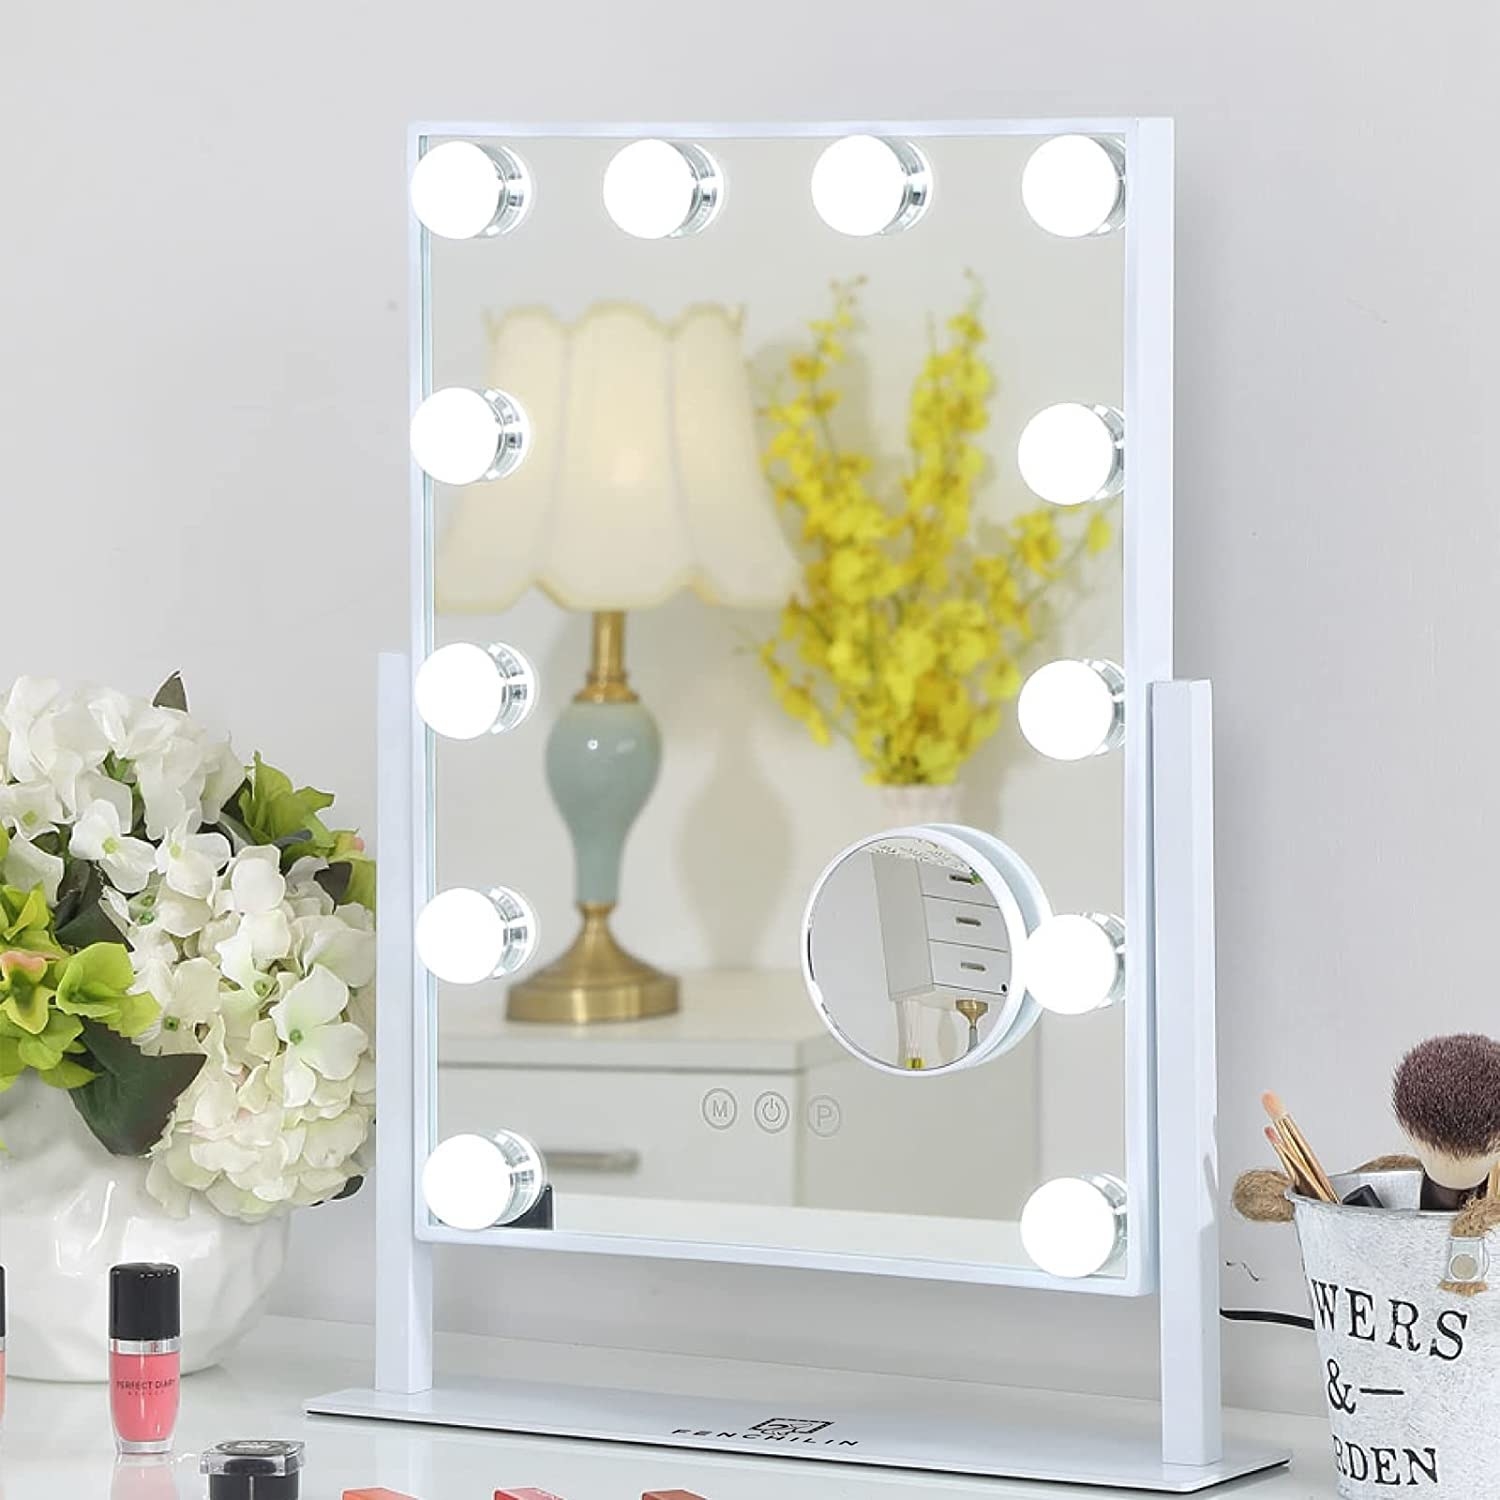 The mirror on a vanity surrounded by makeup and beauty tools